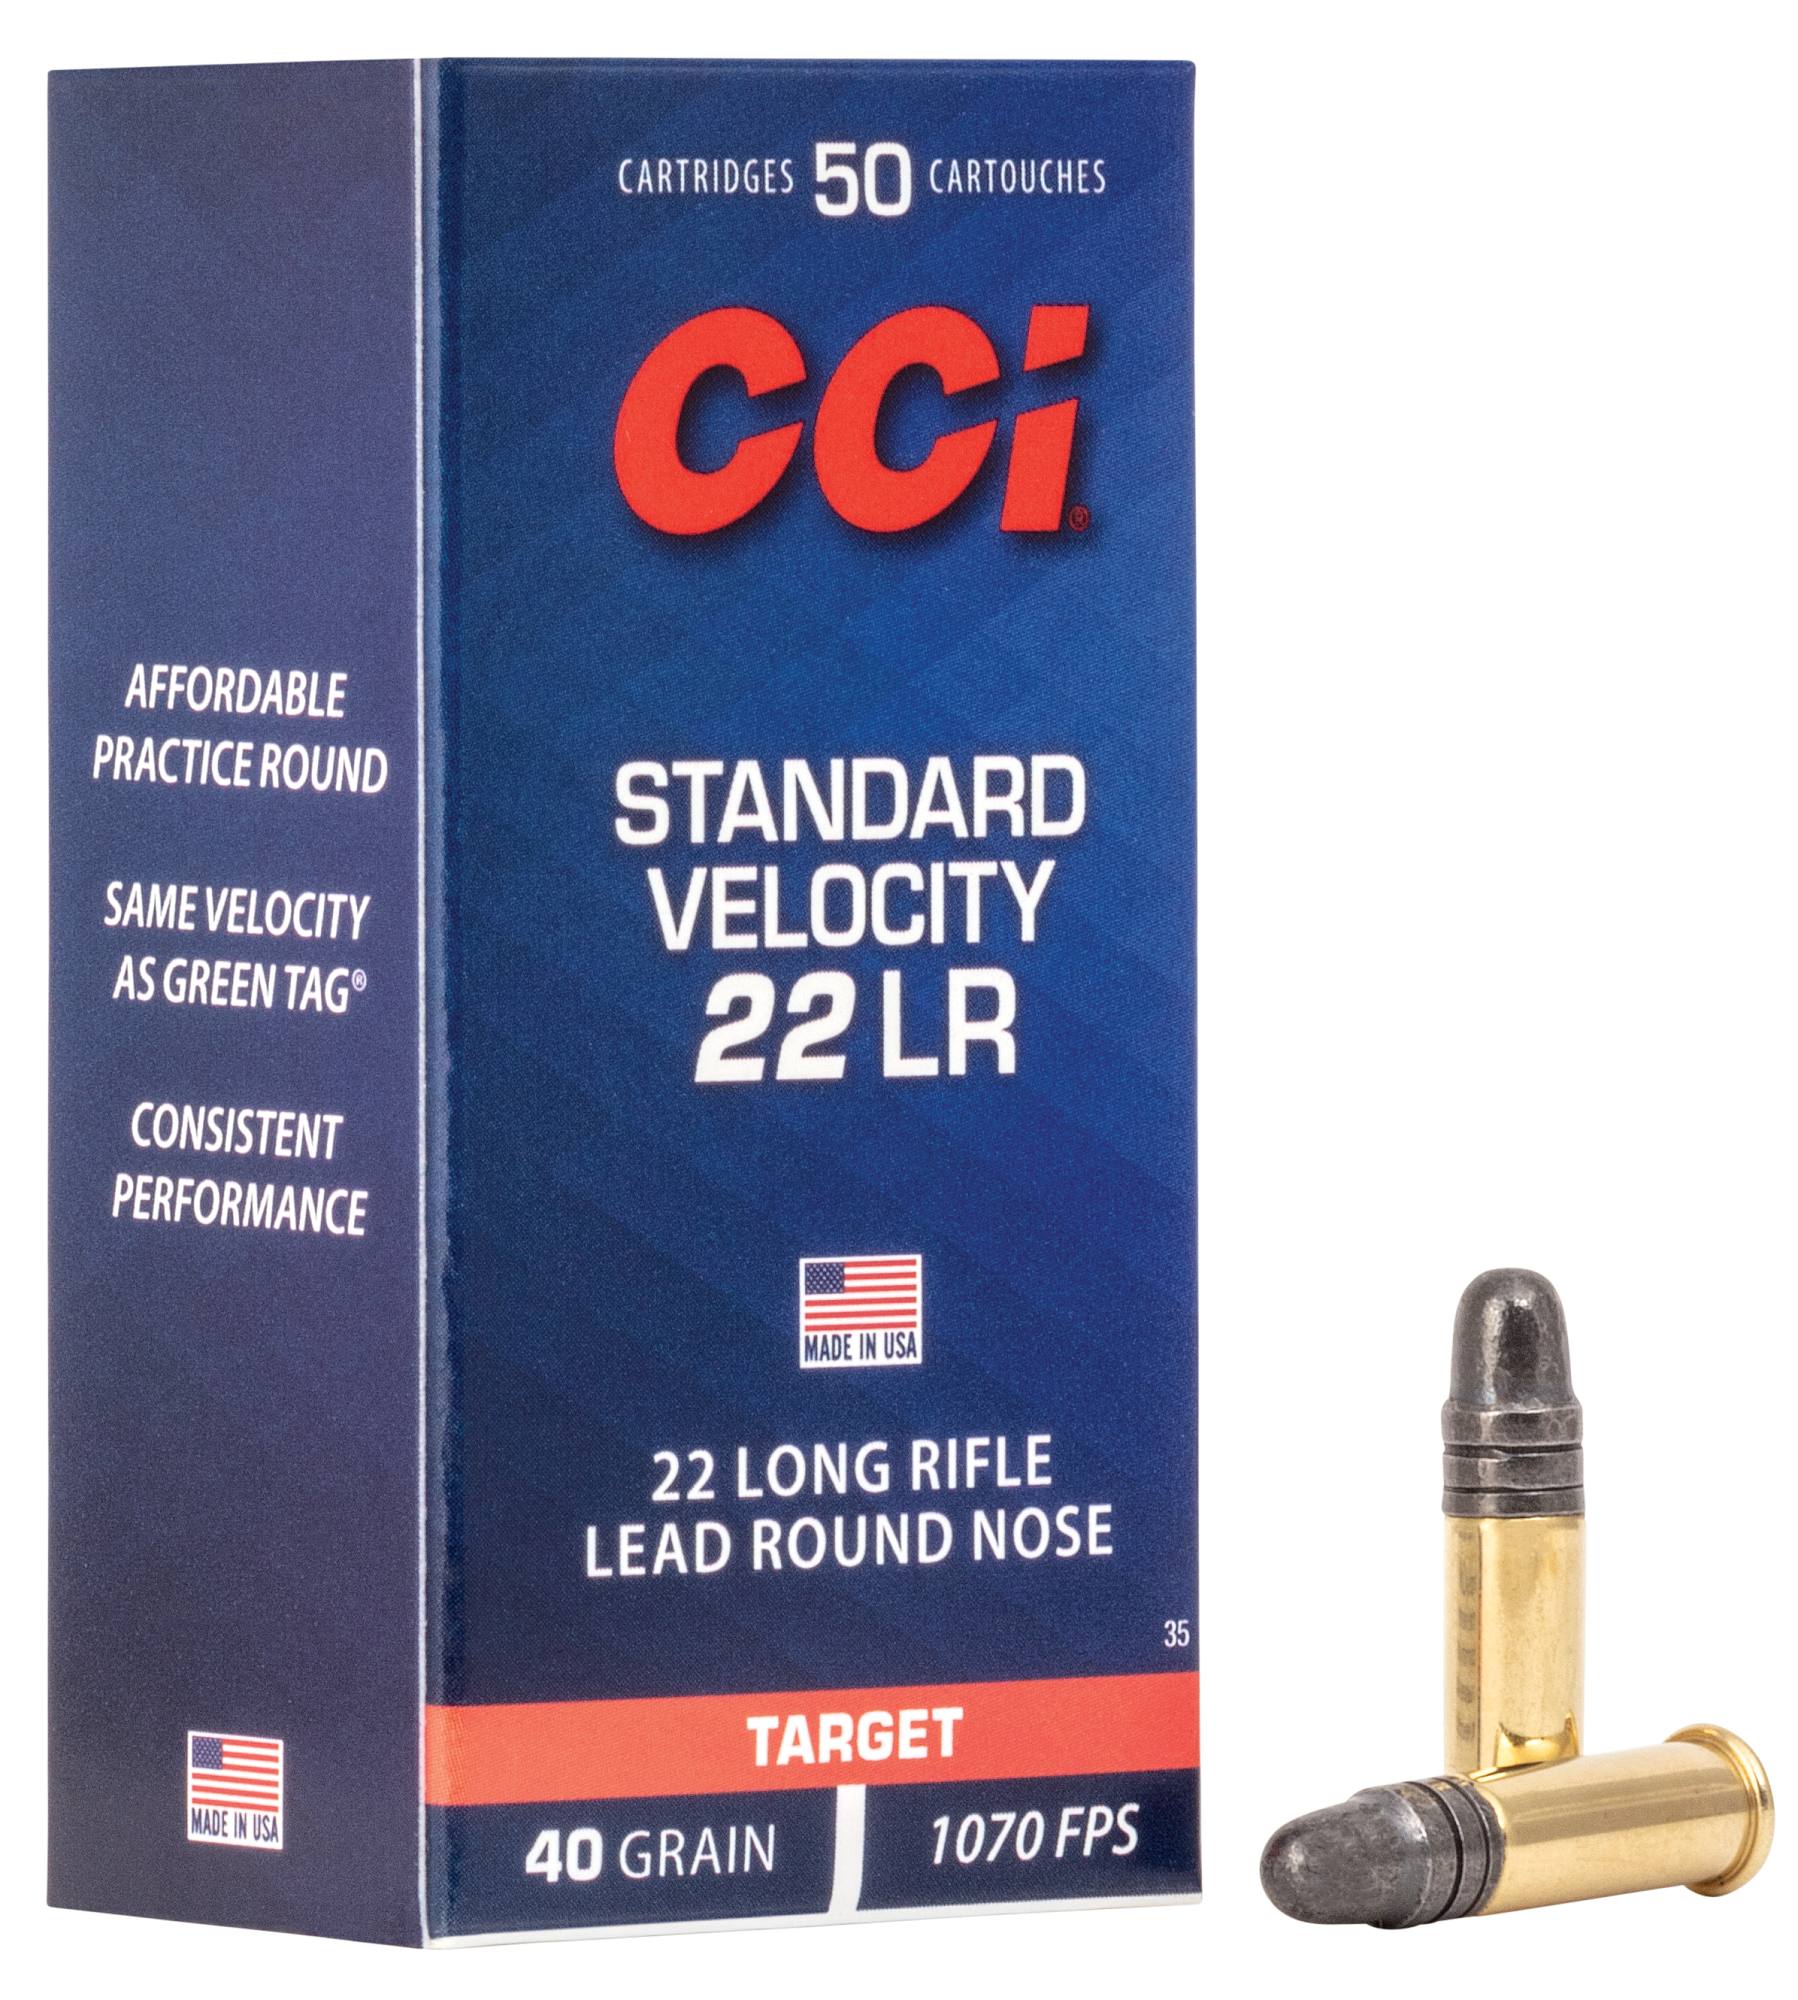 High velocity ammunition testing - inspecting six classic rounds